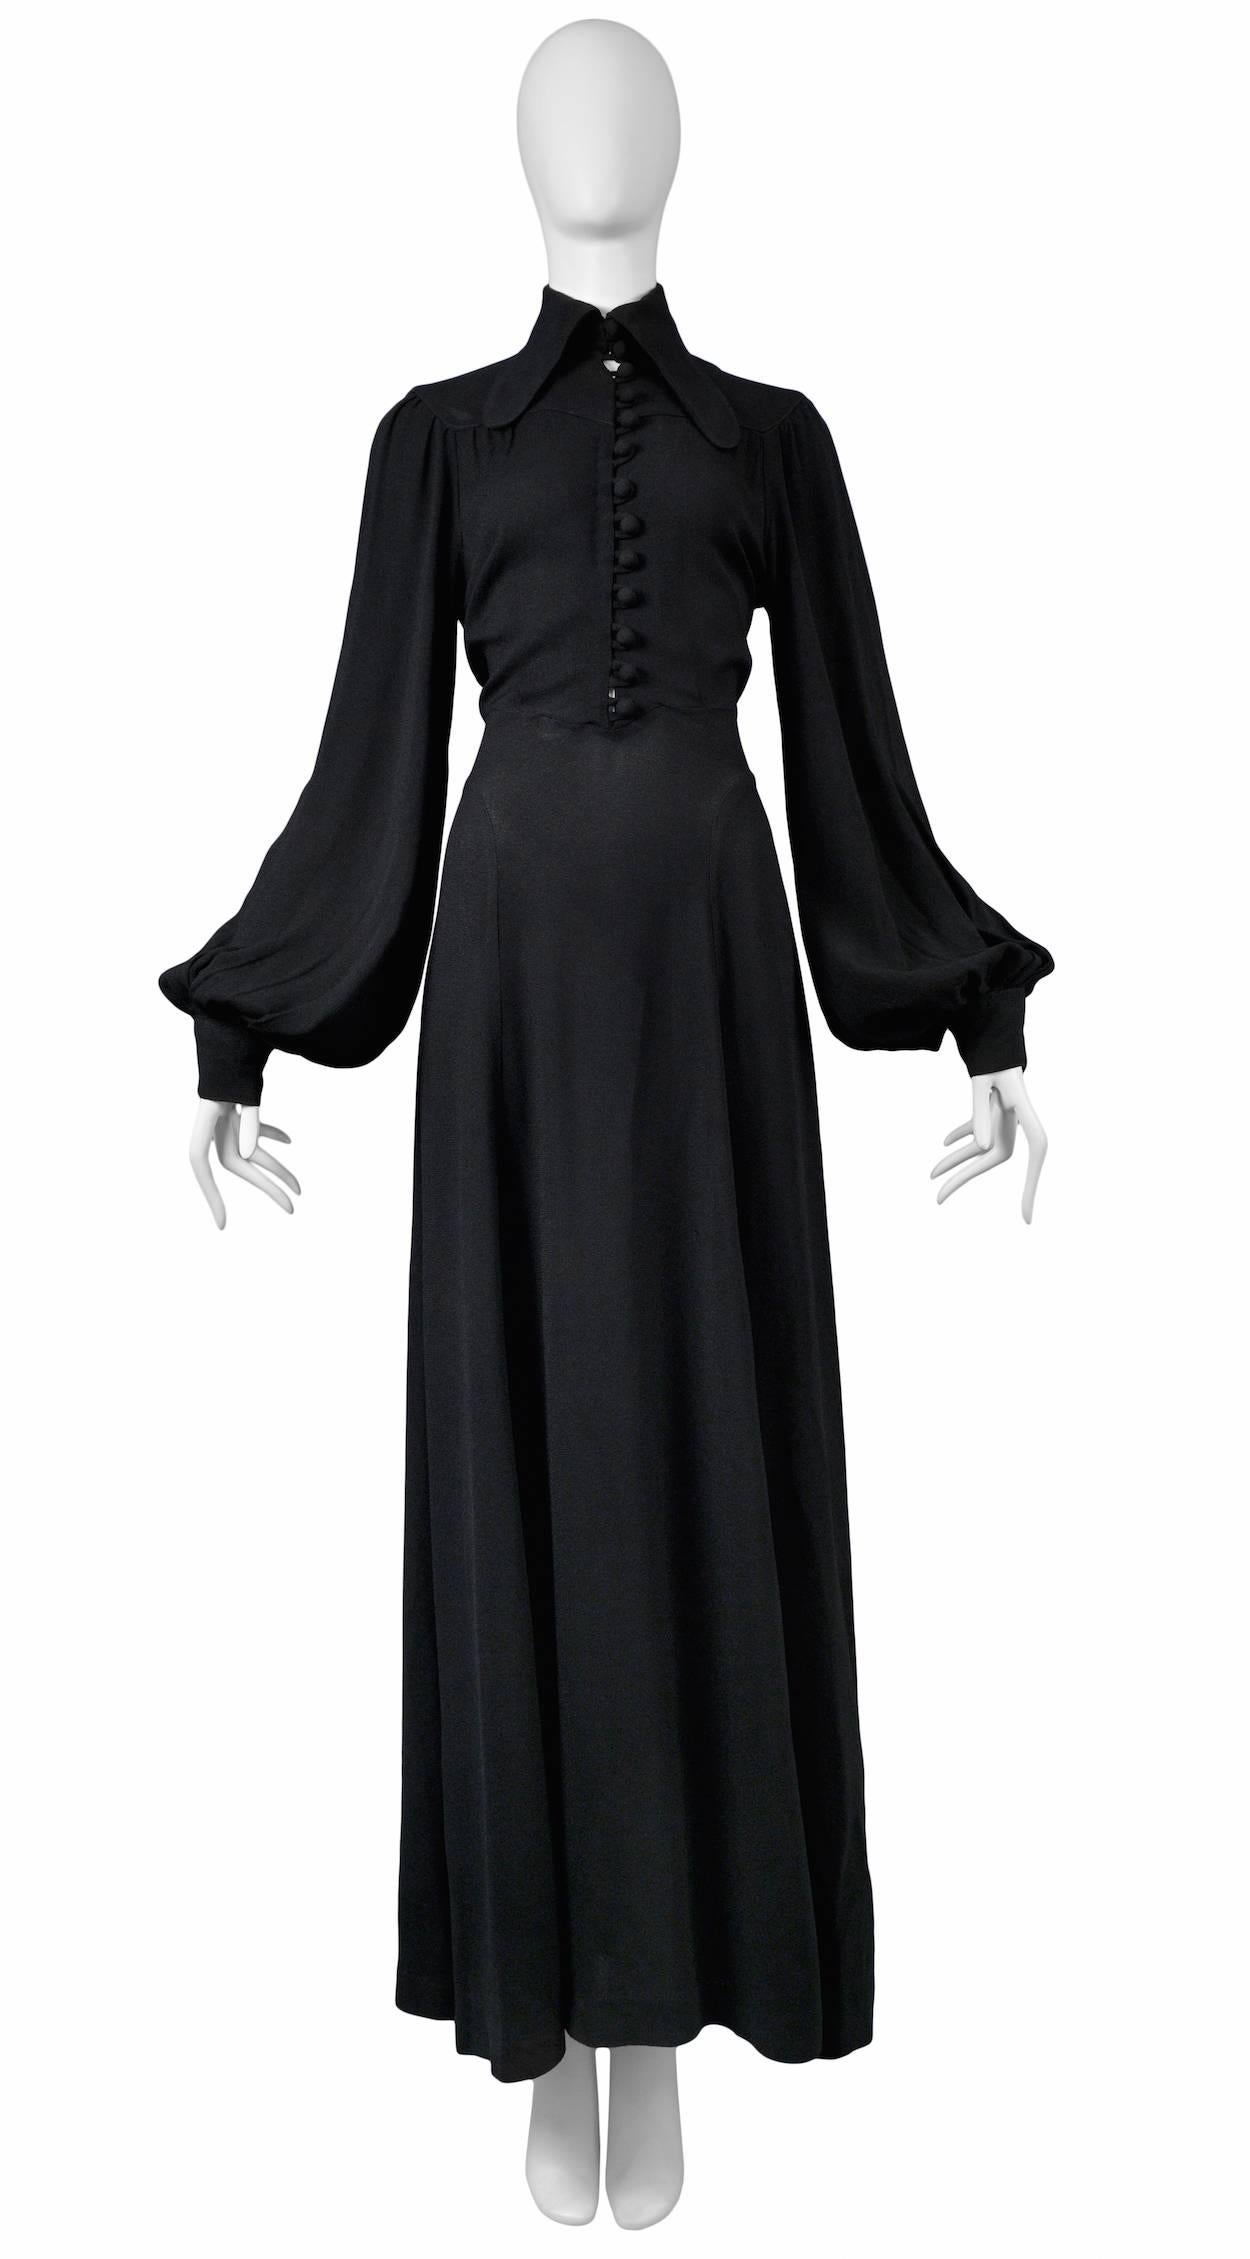 Vintage Ossie Clark black crepe gown featuring an elongated collar, bell sleeves, a tie at the back waist and a covered button front opening.
Please inquire for additional images and measurements.